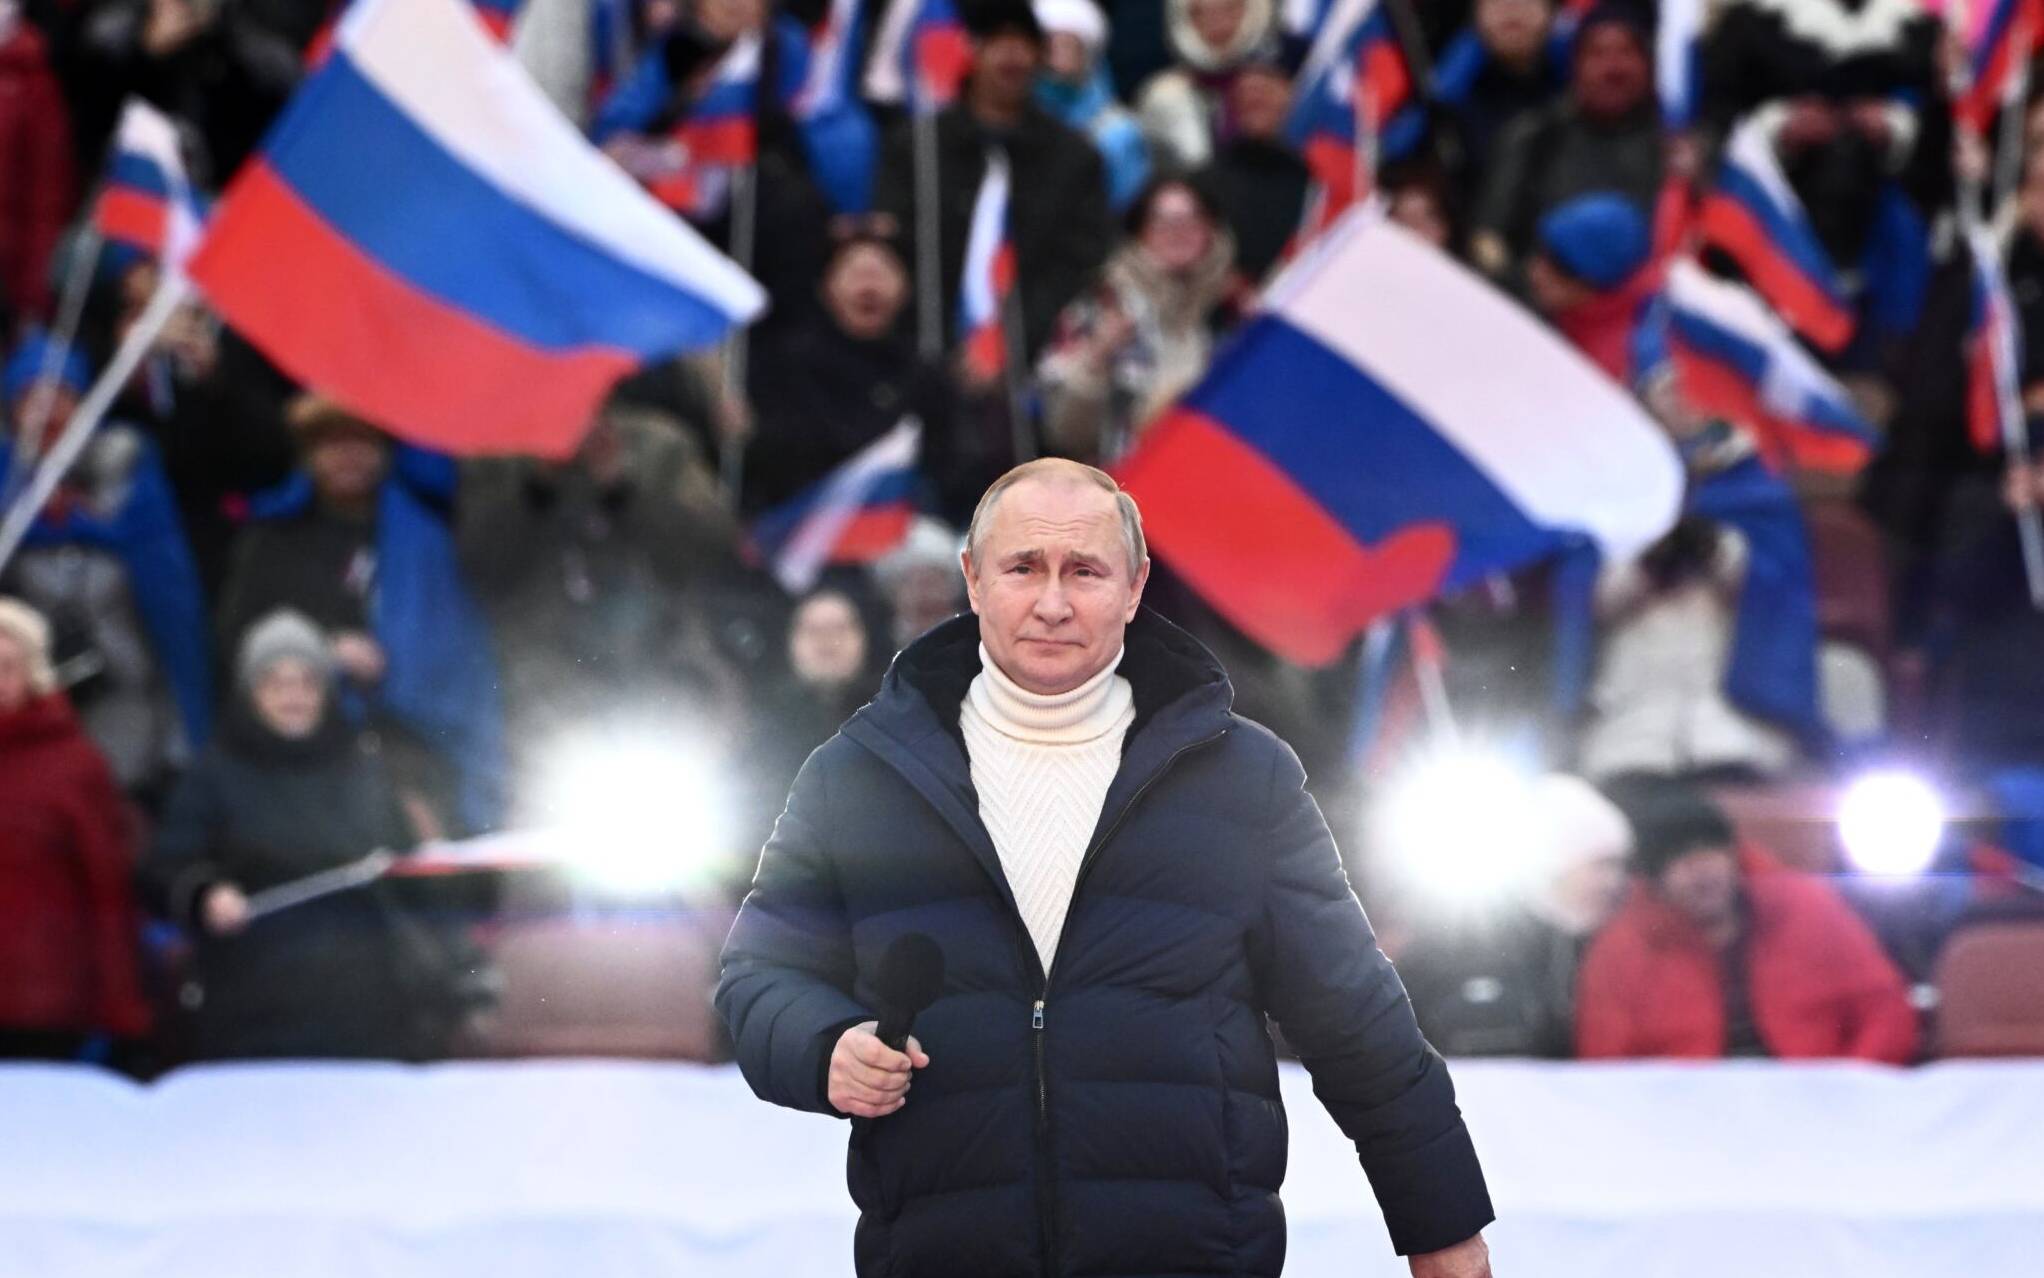 Russian President Vladimir Putin attends a concert marking the eighth anniversary of Russia's annexation of Crimea at the Luzhniki stadium in Moscow on March 18, 2022. (Photo by Sergei GUNEYEV / POOL / AFP)